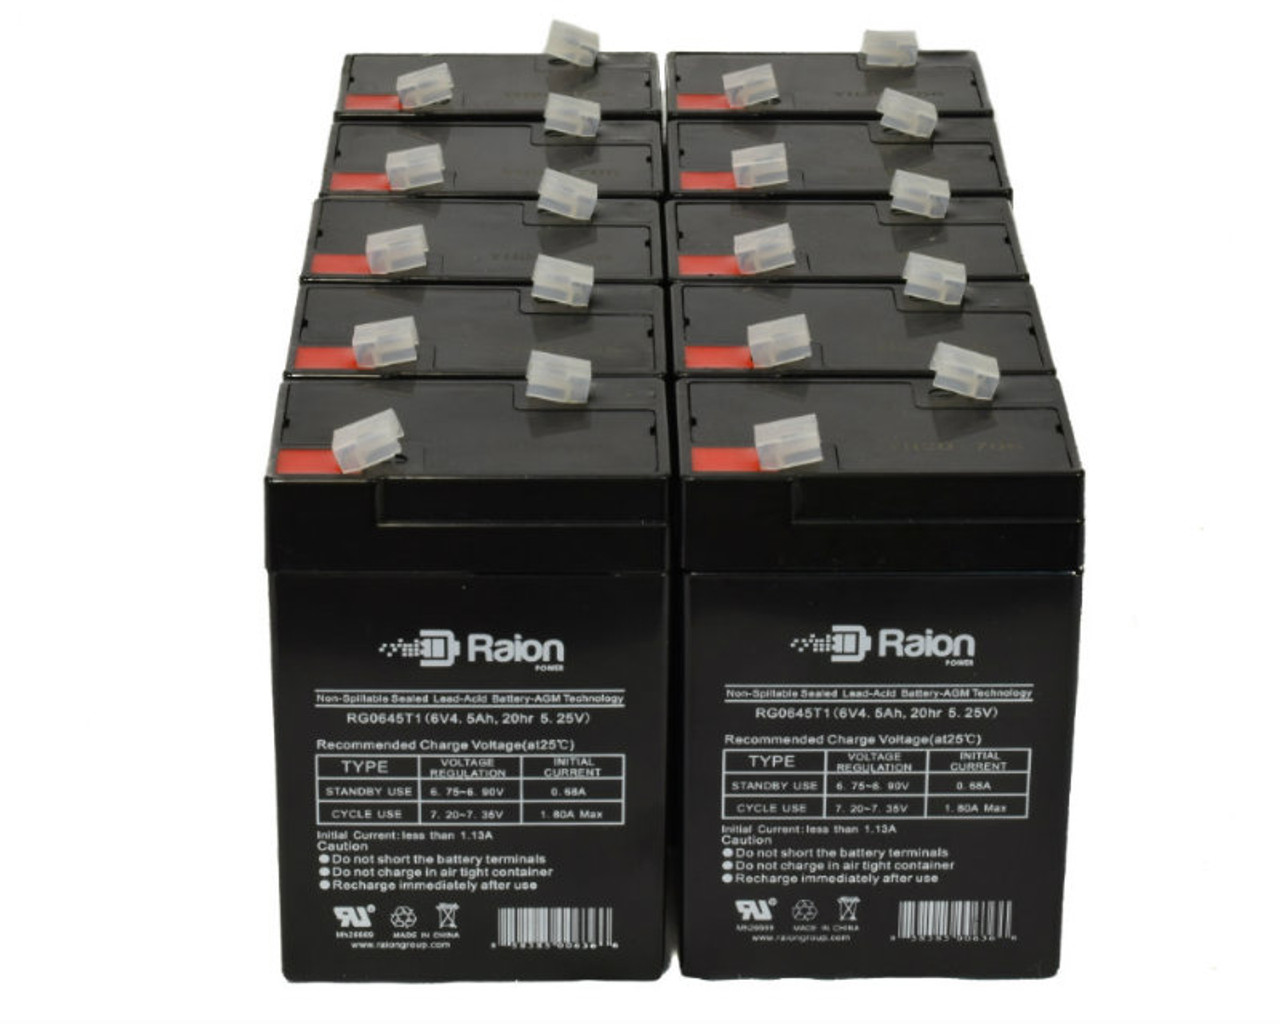 Raion Power 6V 4.5Ah Replacement Emergency Light Battery for Light Alarms CE15BF - 10 Pack